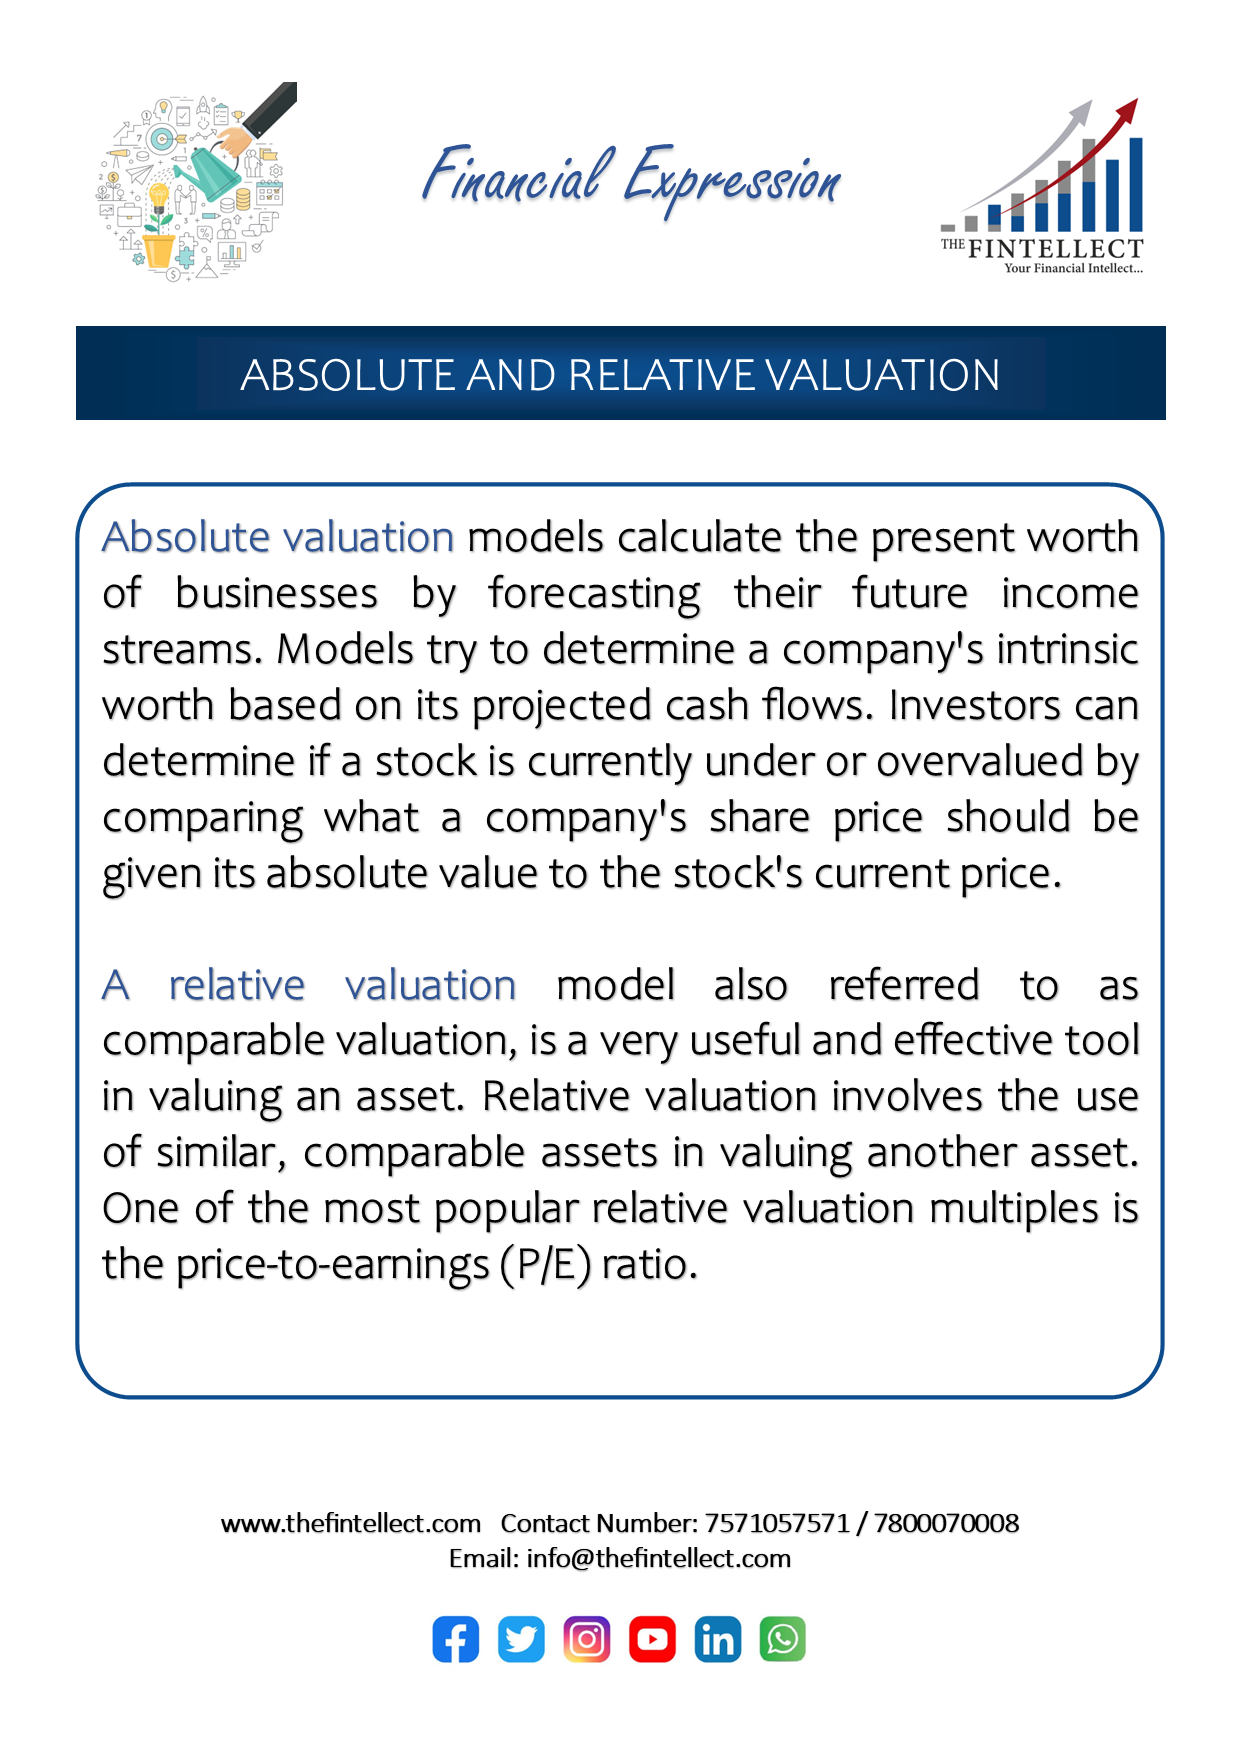 8031897_ABSOLUTE AND RELATIVE VALUATION.png